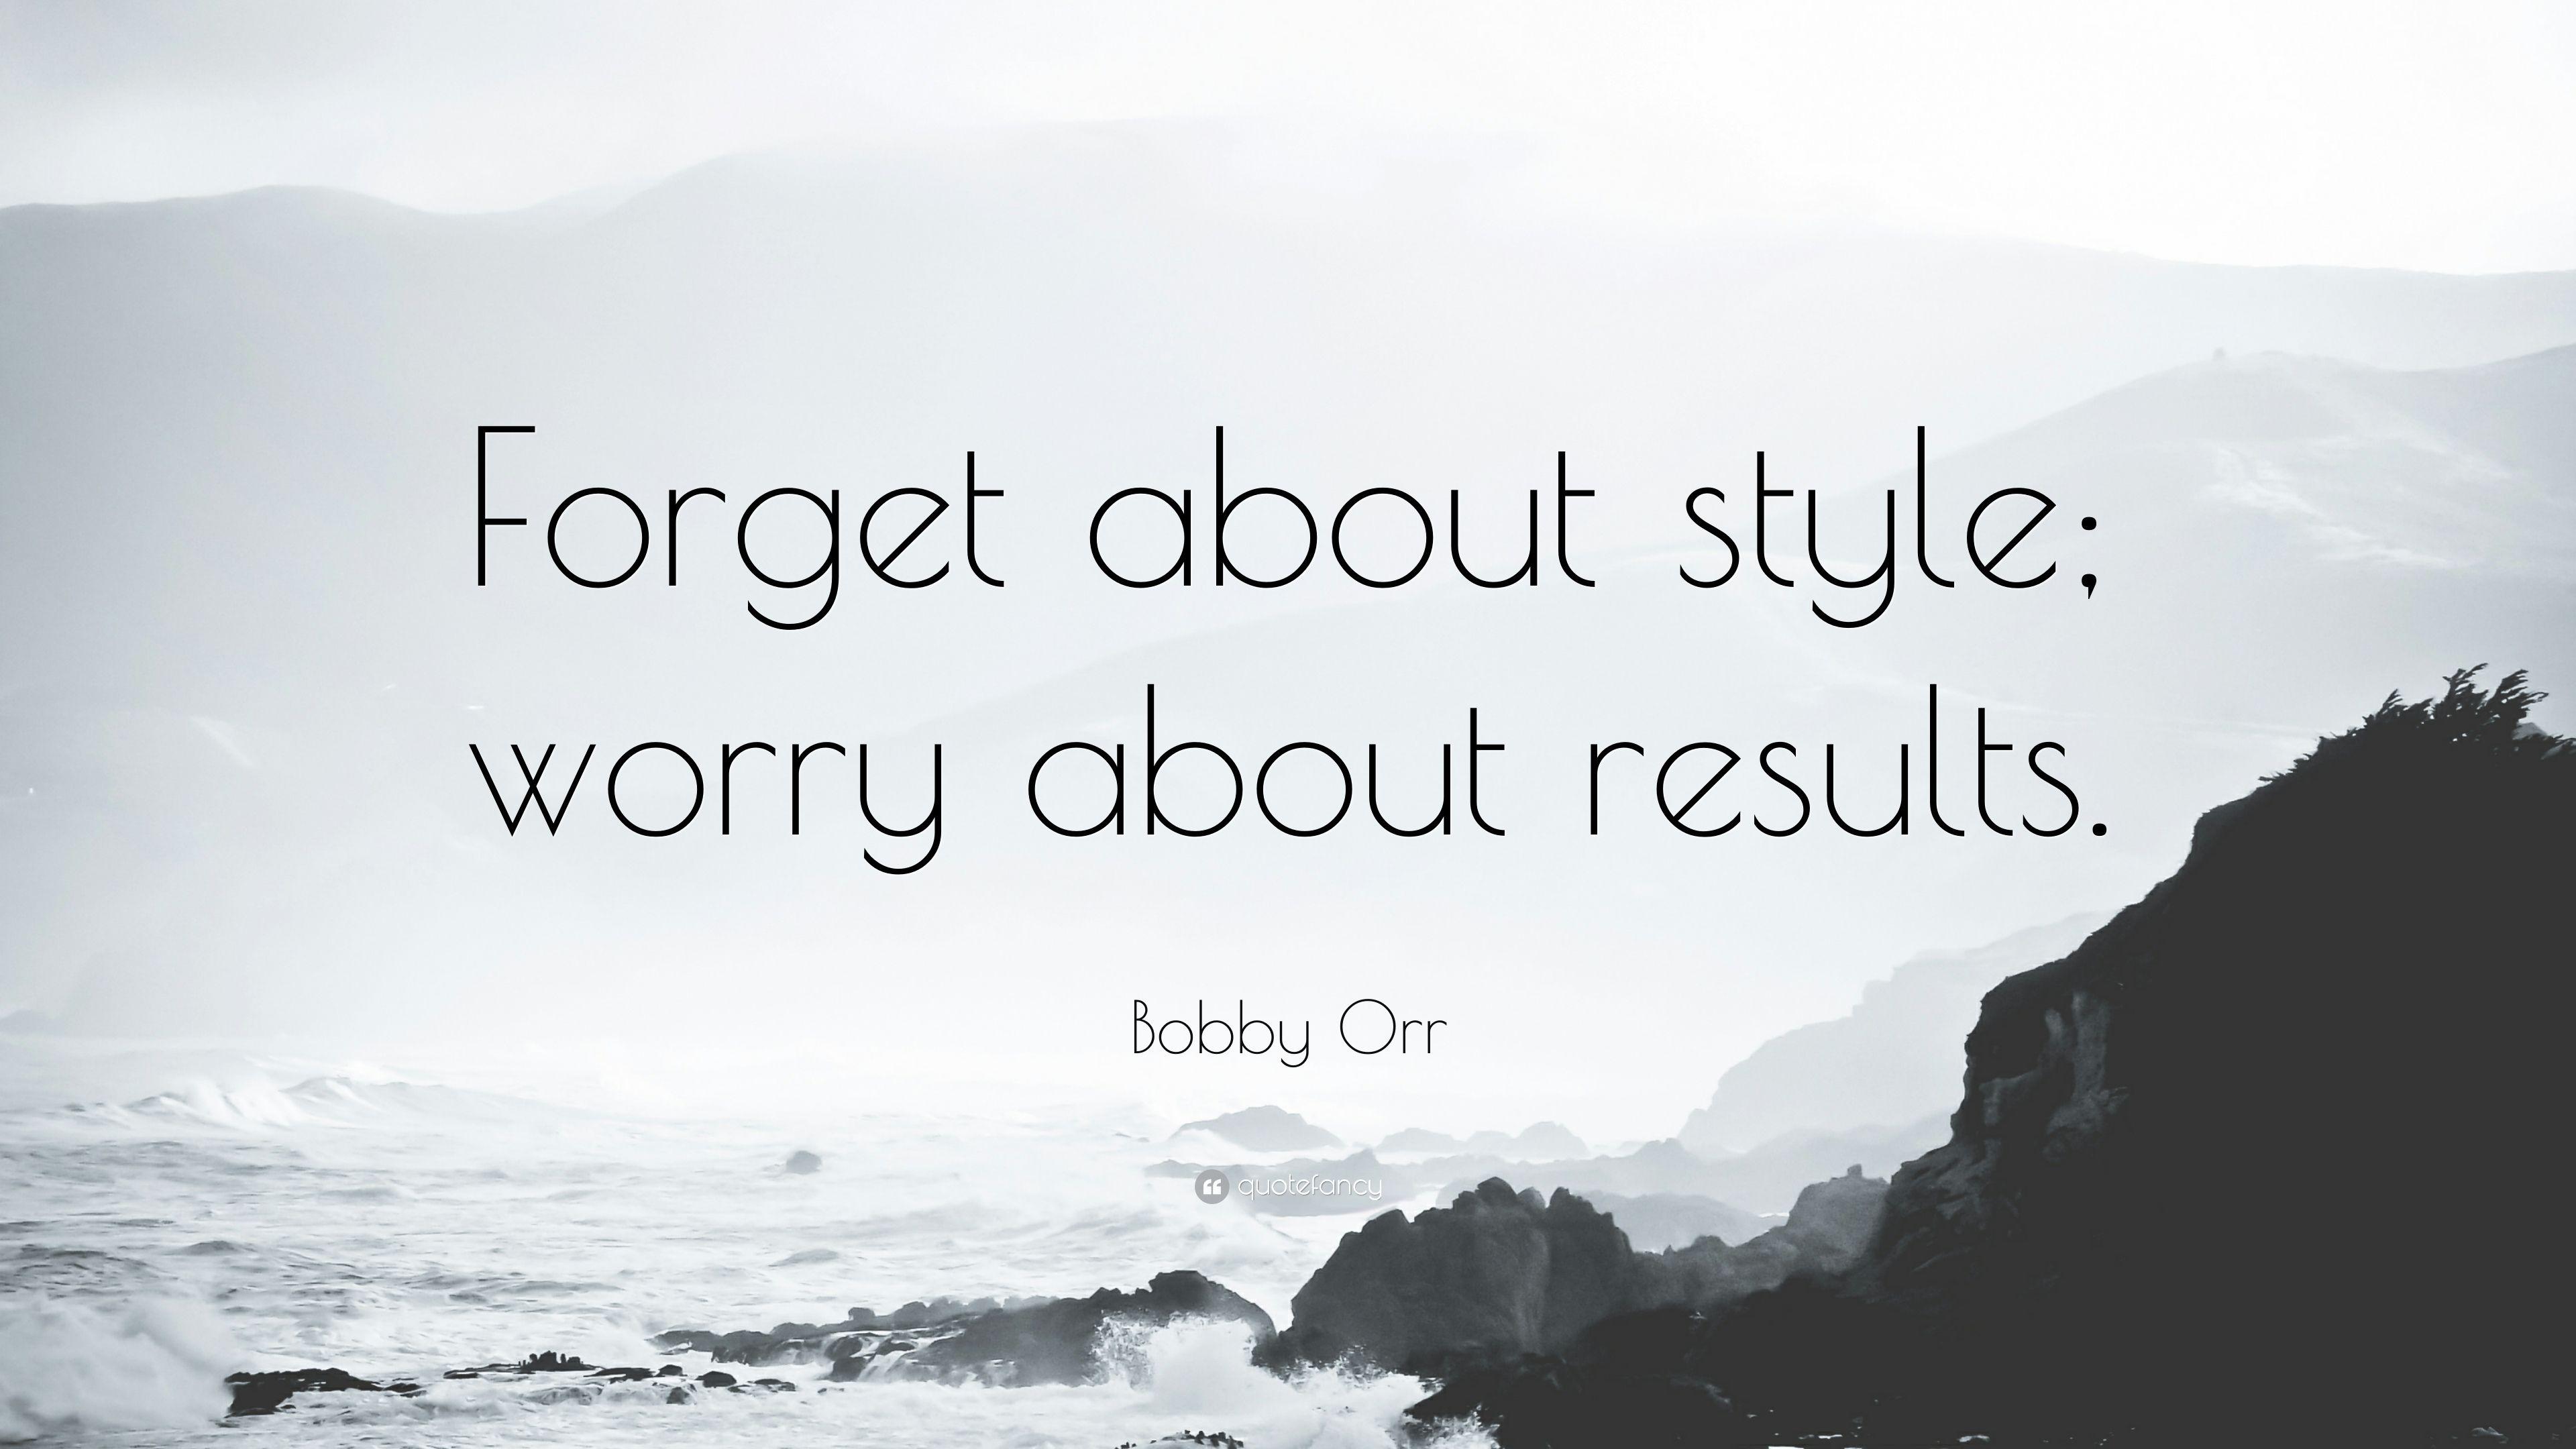 Bobby Orr Quote: “Forget about style; worry about results.” 12